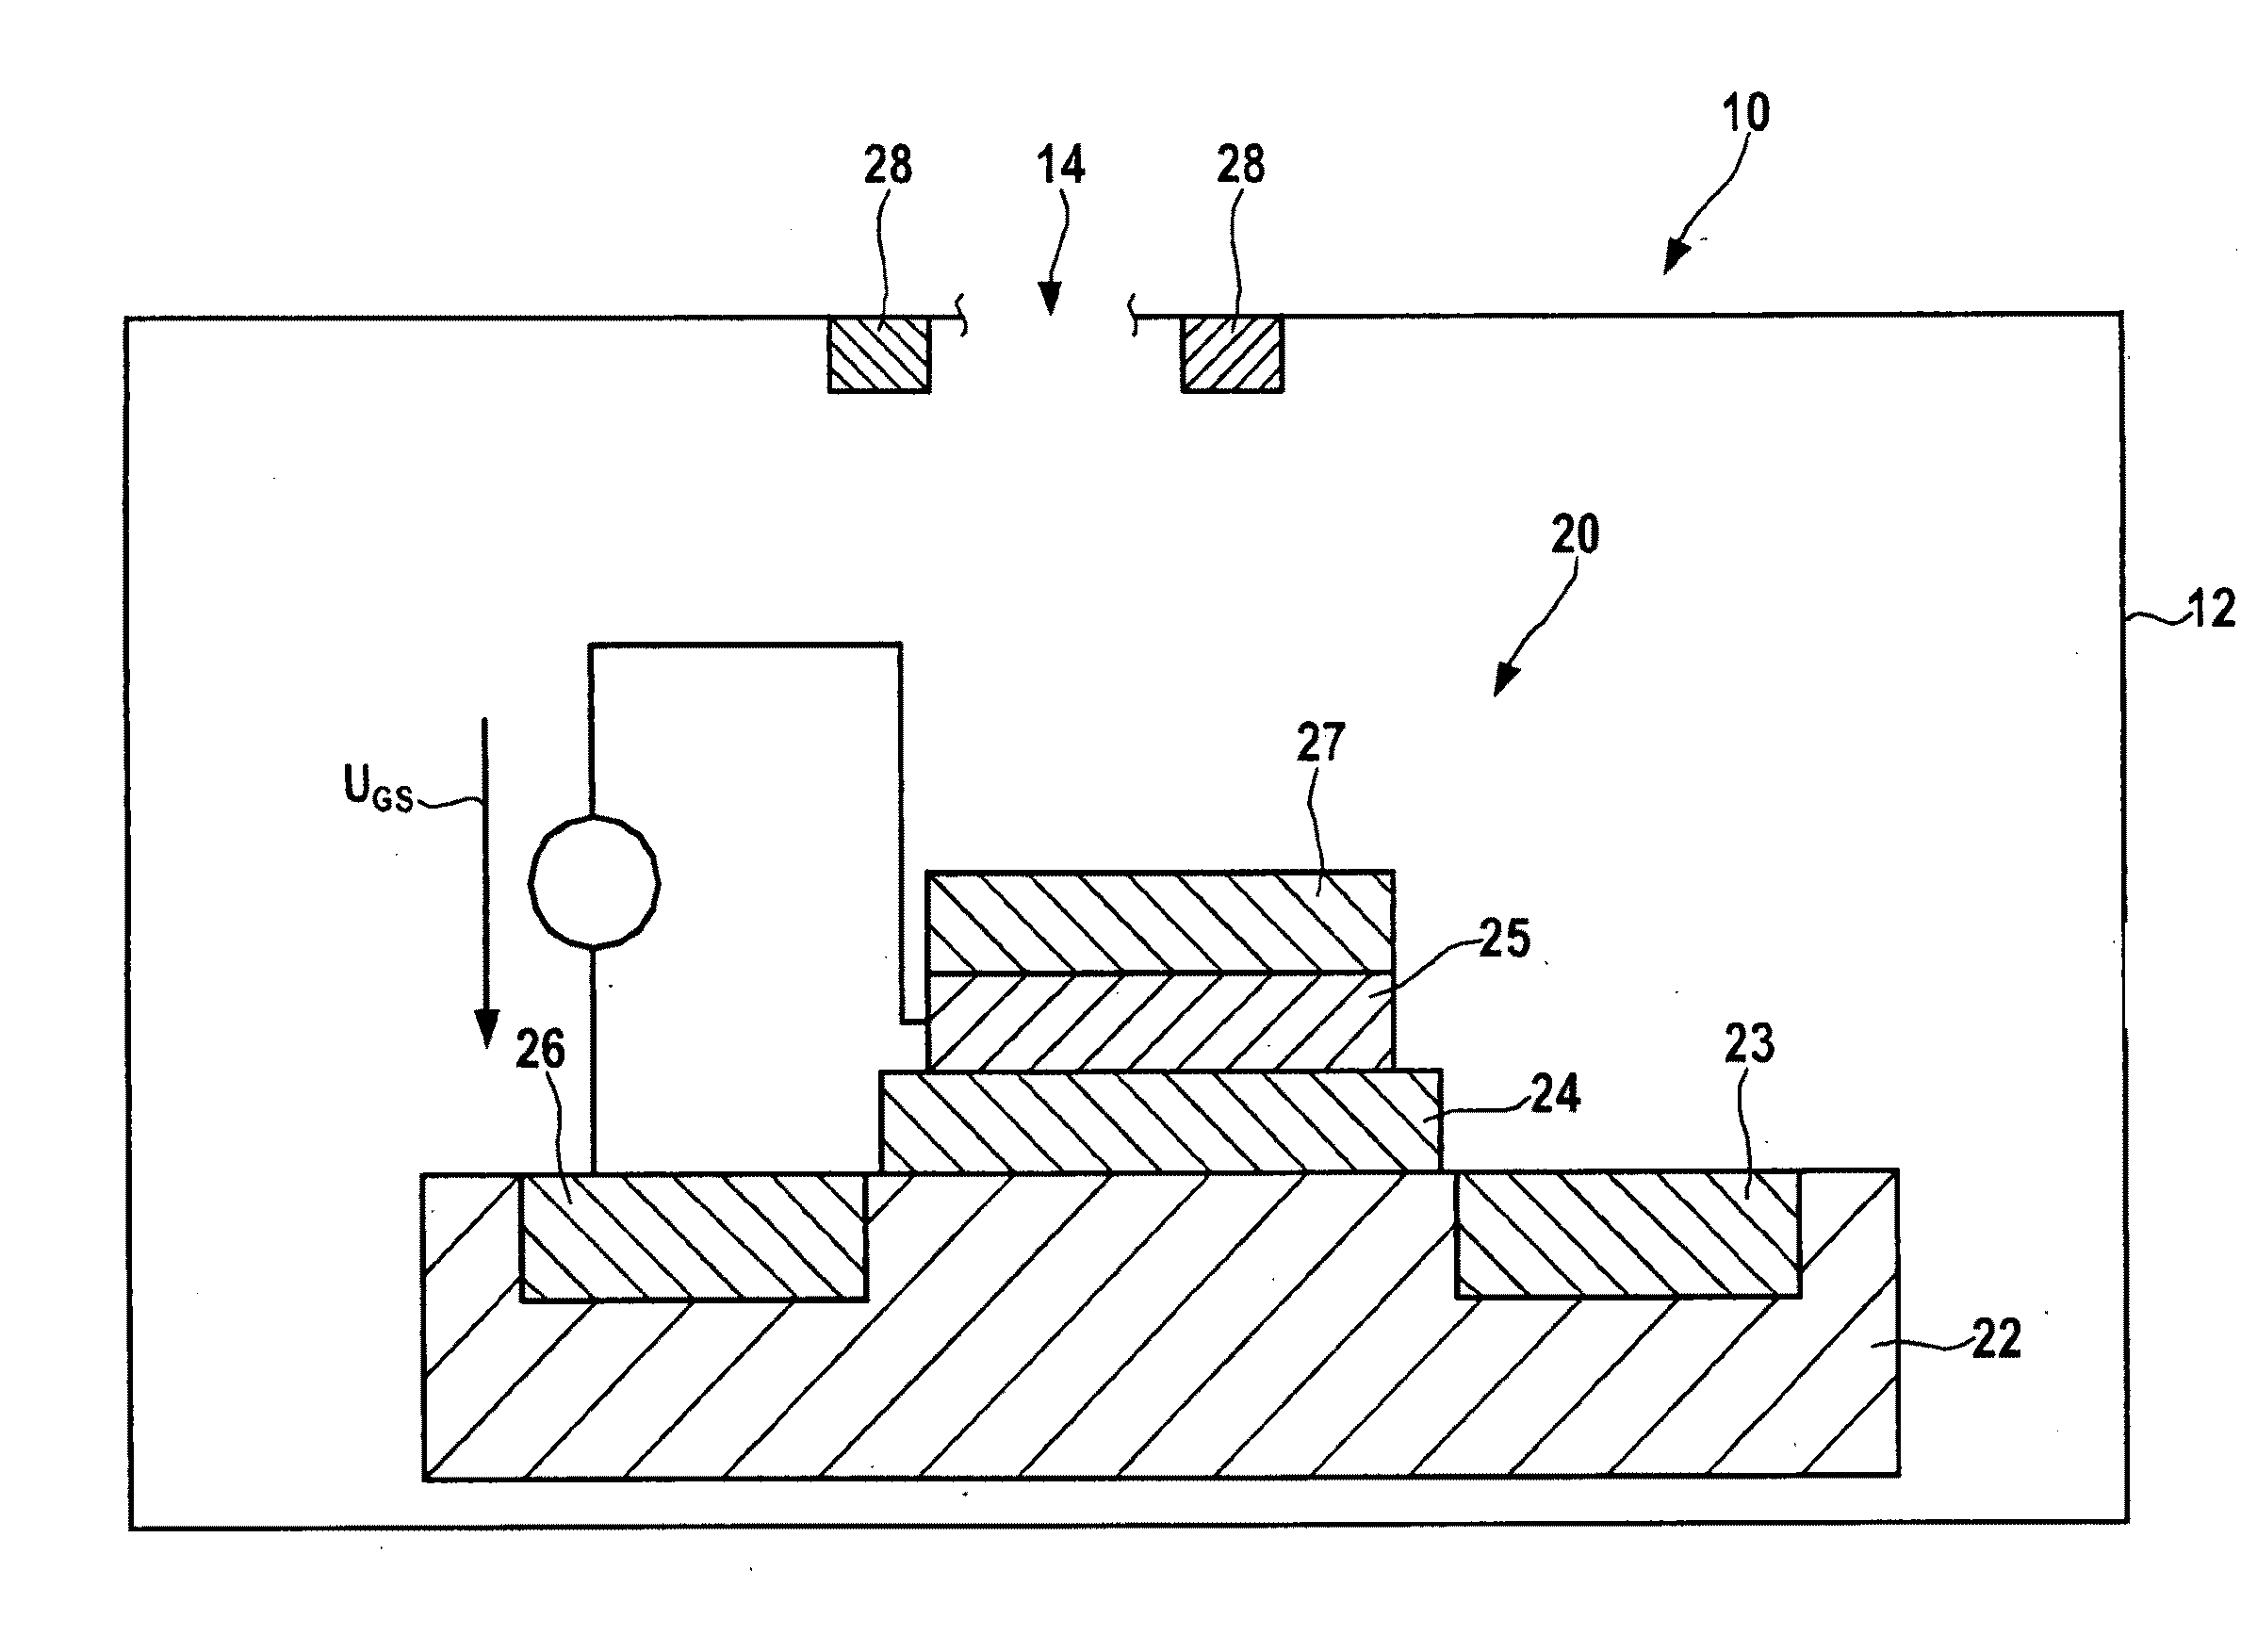 Field effect transistor gas sensor having a housing and porous catalytic material containaed therein